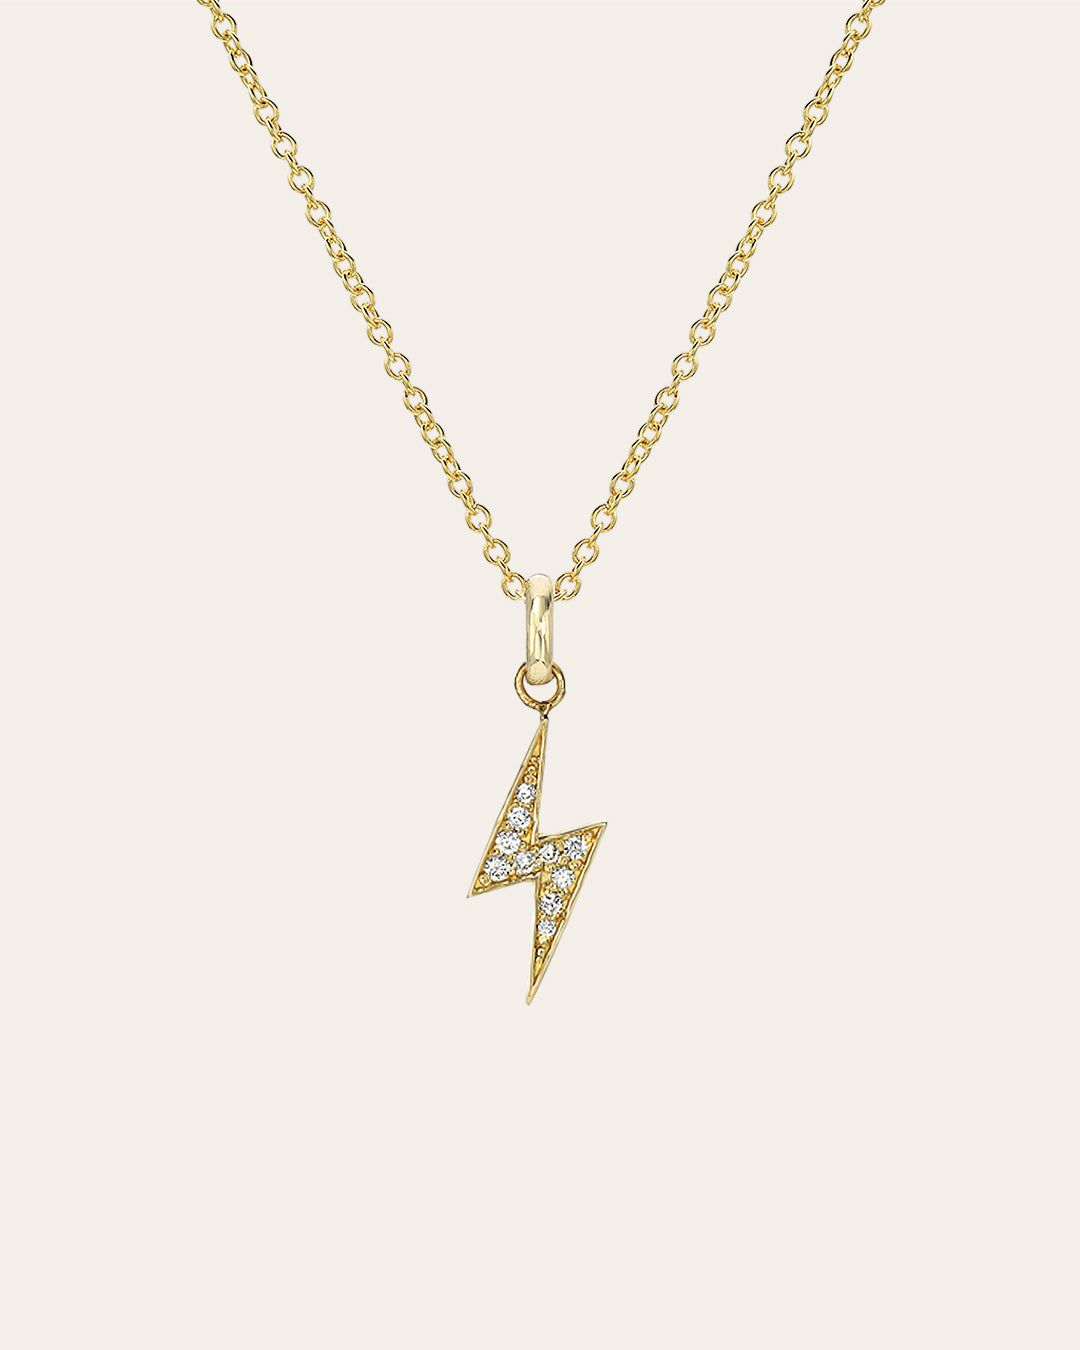 Buy Tiny Lightning Bolt Necklace / Thunder Bolt Necklace / Lighting Jewelry  / Thin Dainty Jewelry Online in India - Etsy